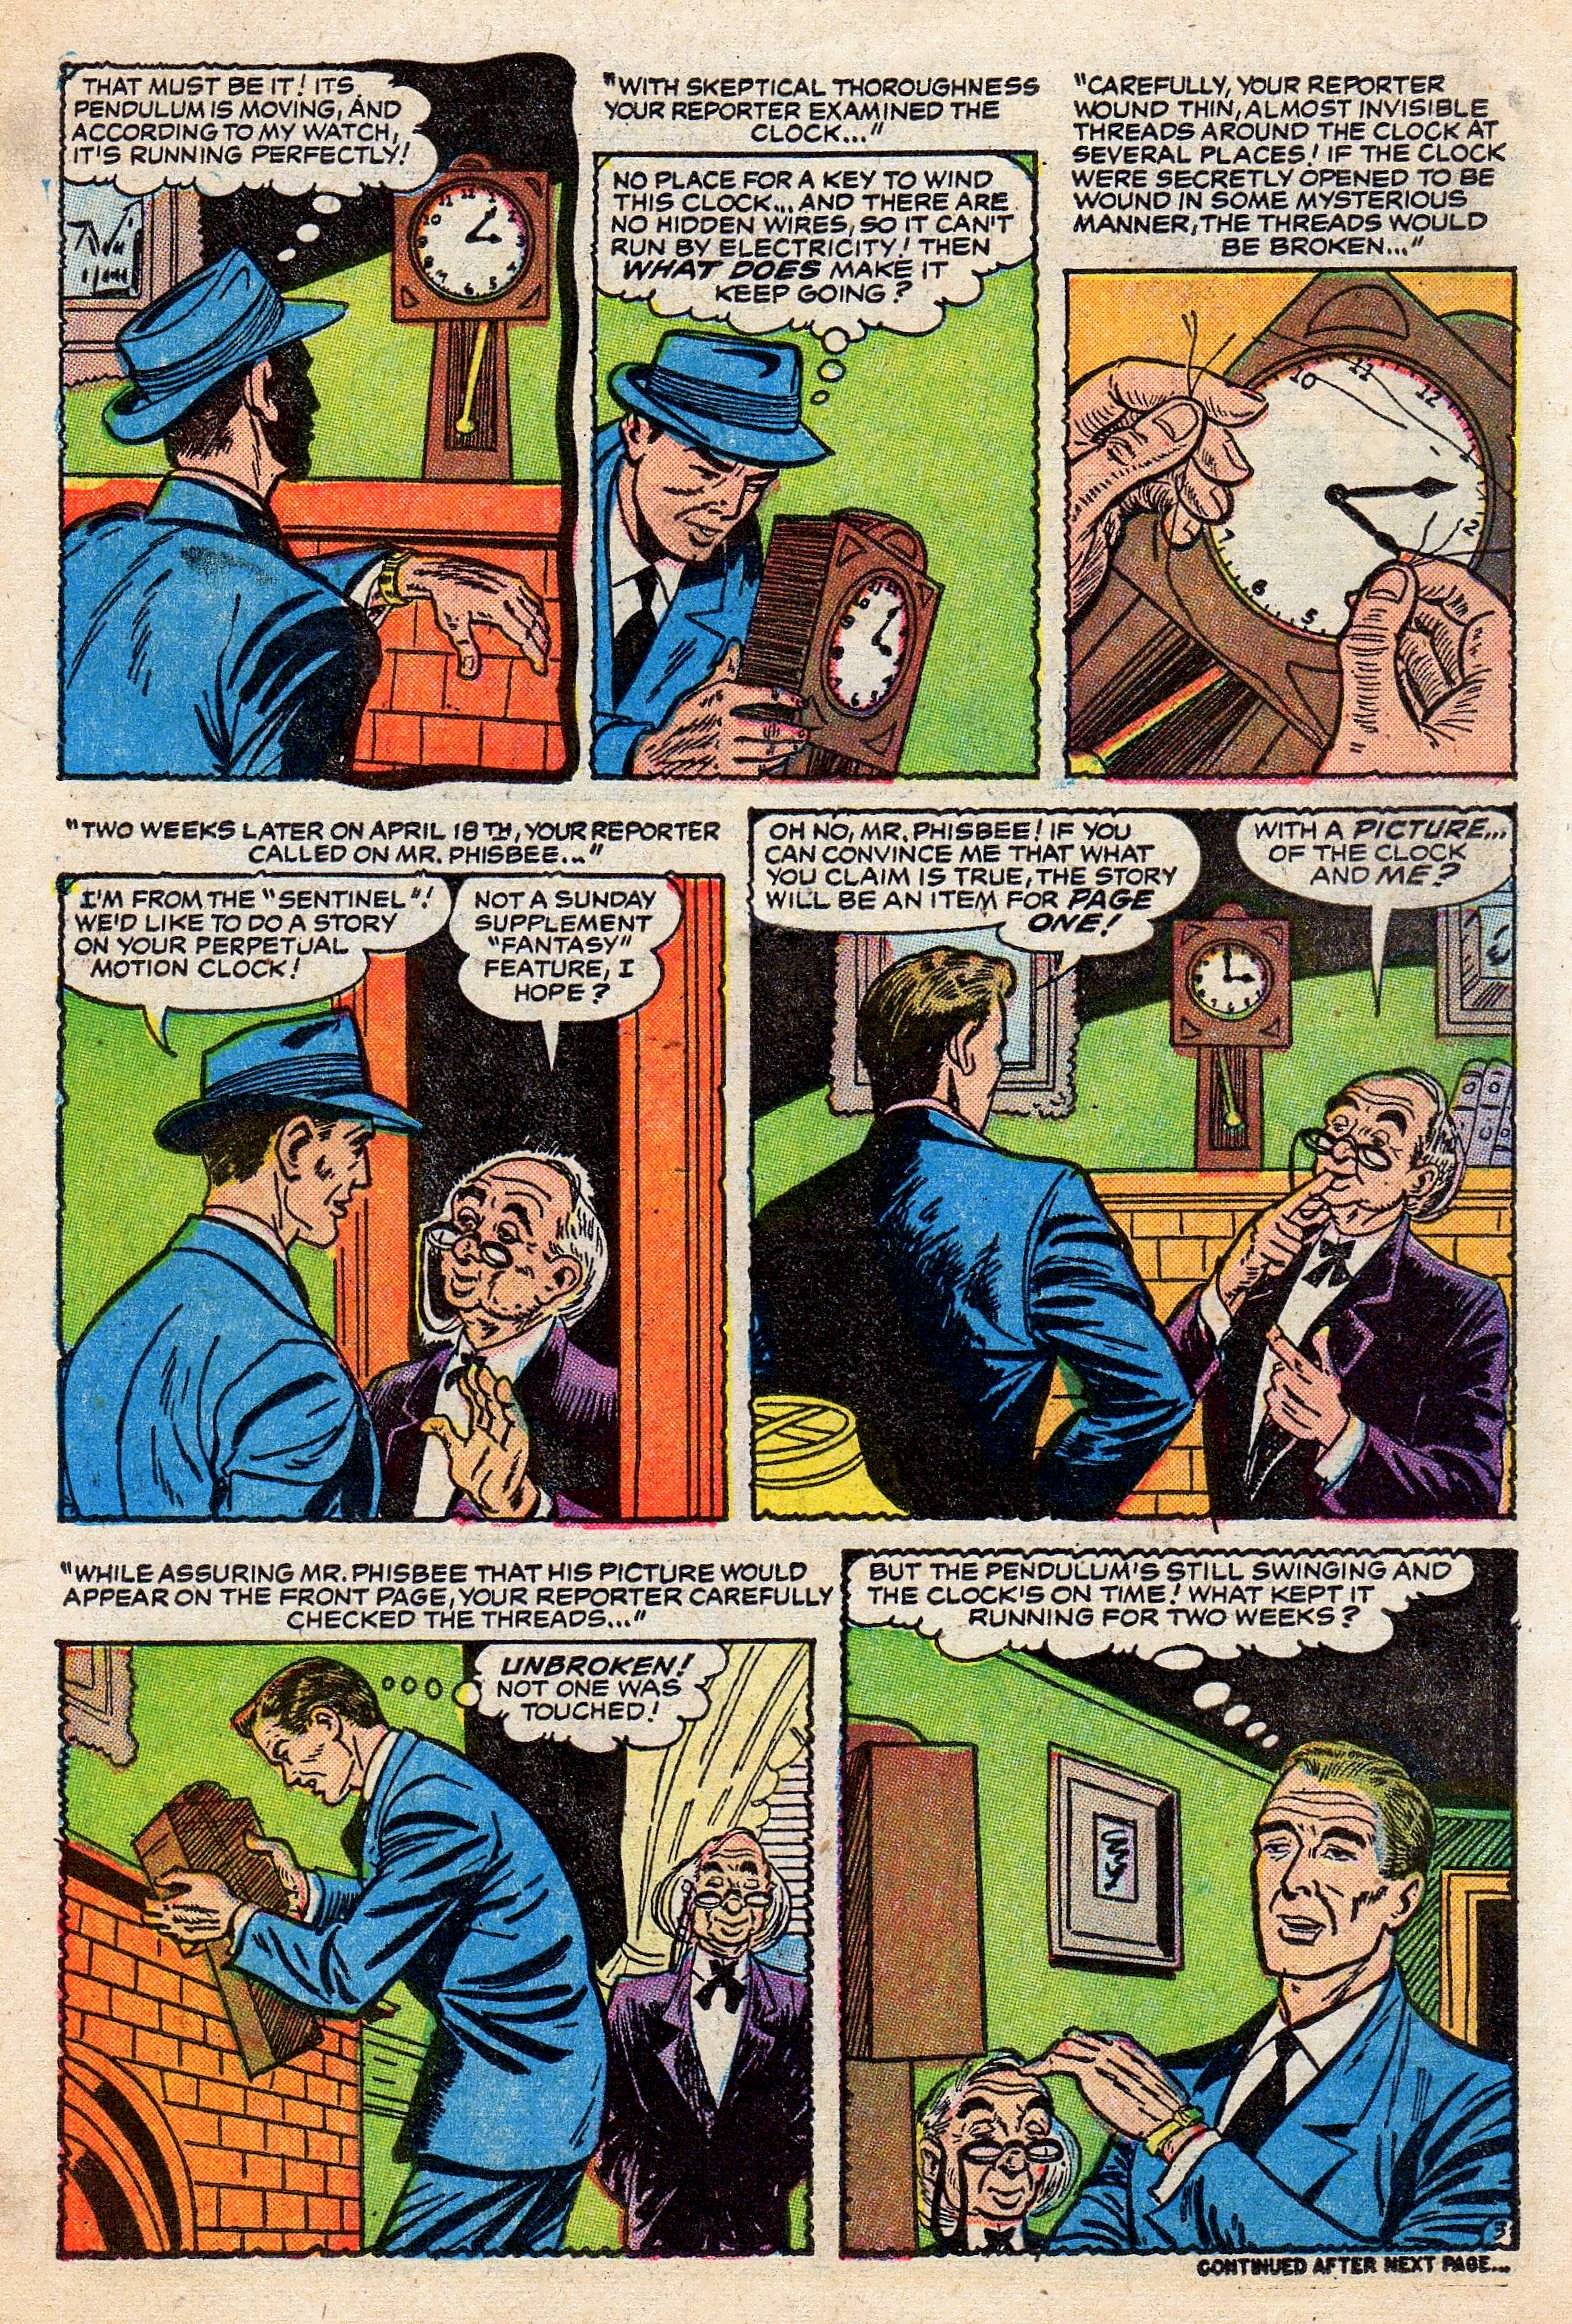 Marvel Tales (1949) 136 Page 17